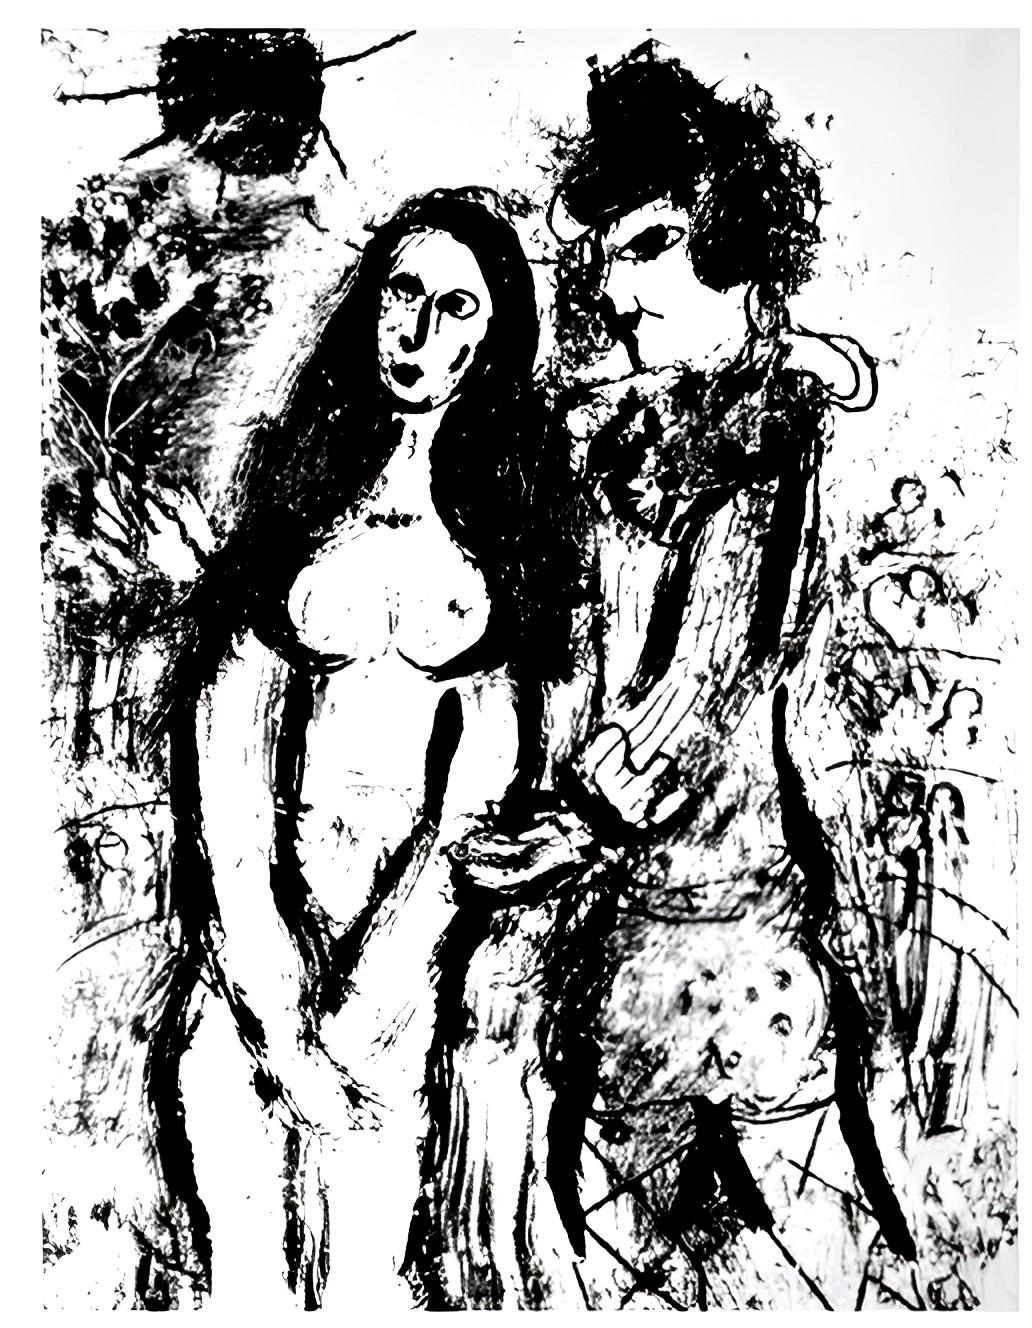 Clown In Love from Chagall Lithographs I - Print by (after) Marc Chagall